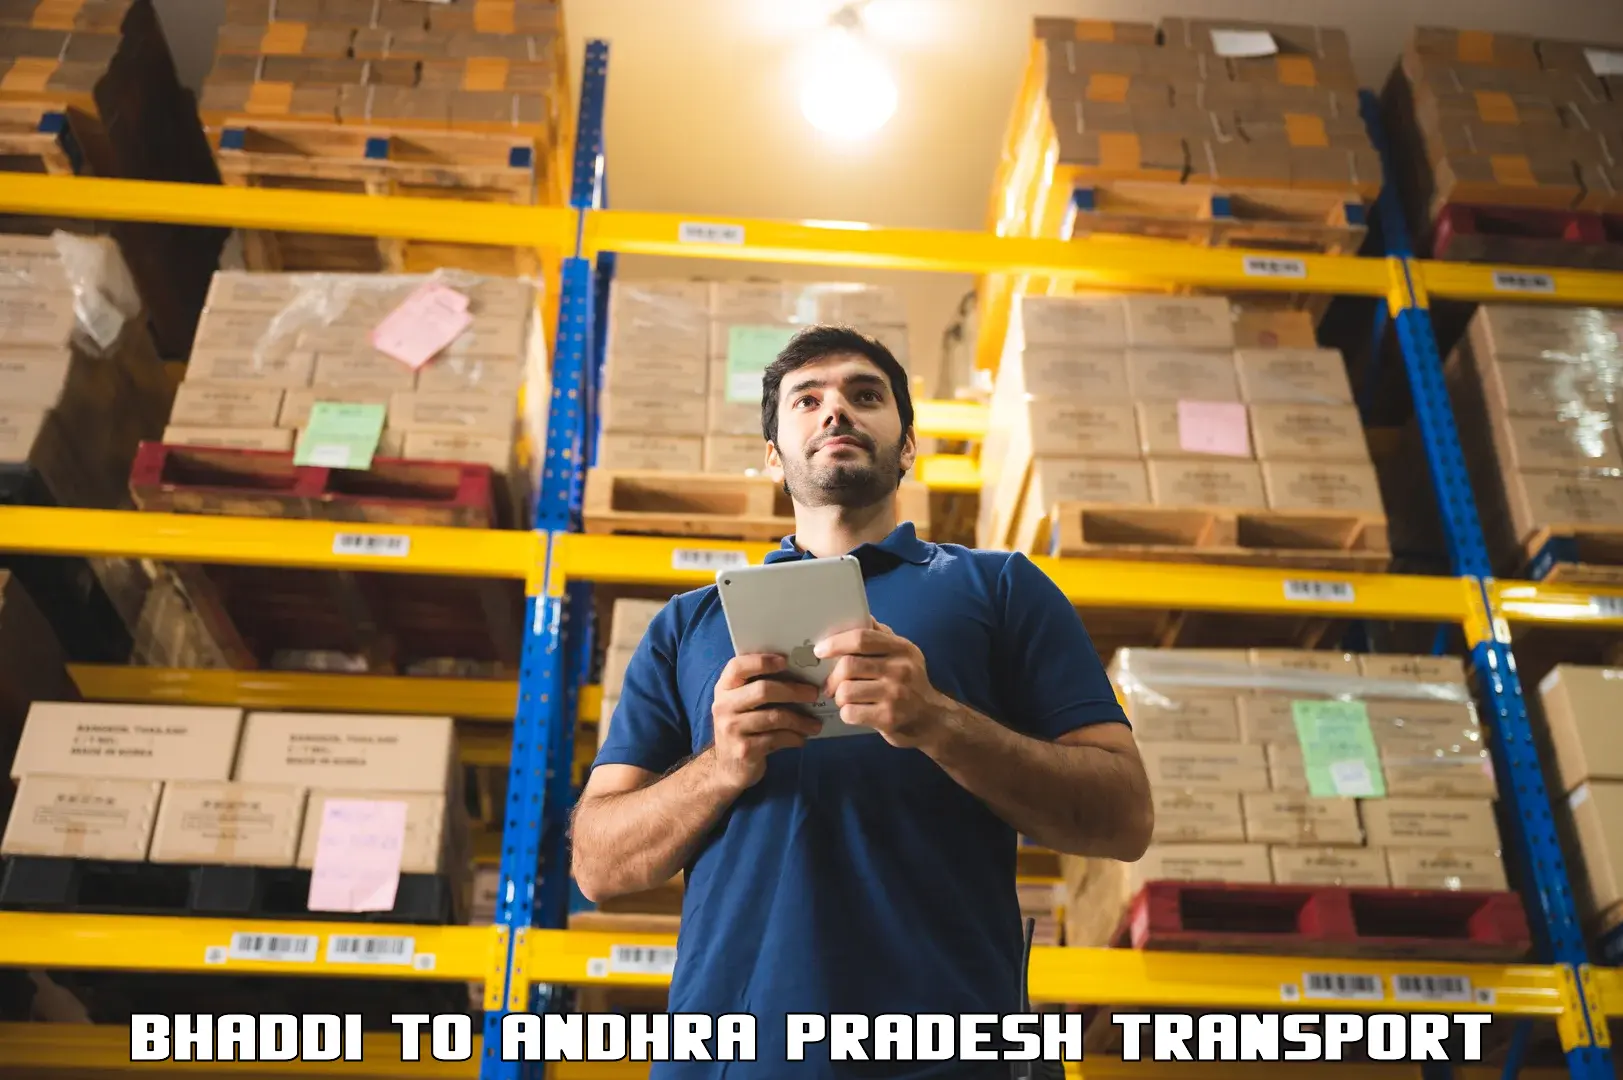 Road transport online services Bhaddi to Kothapalli